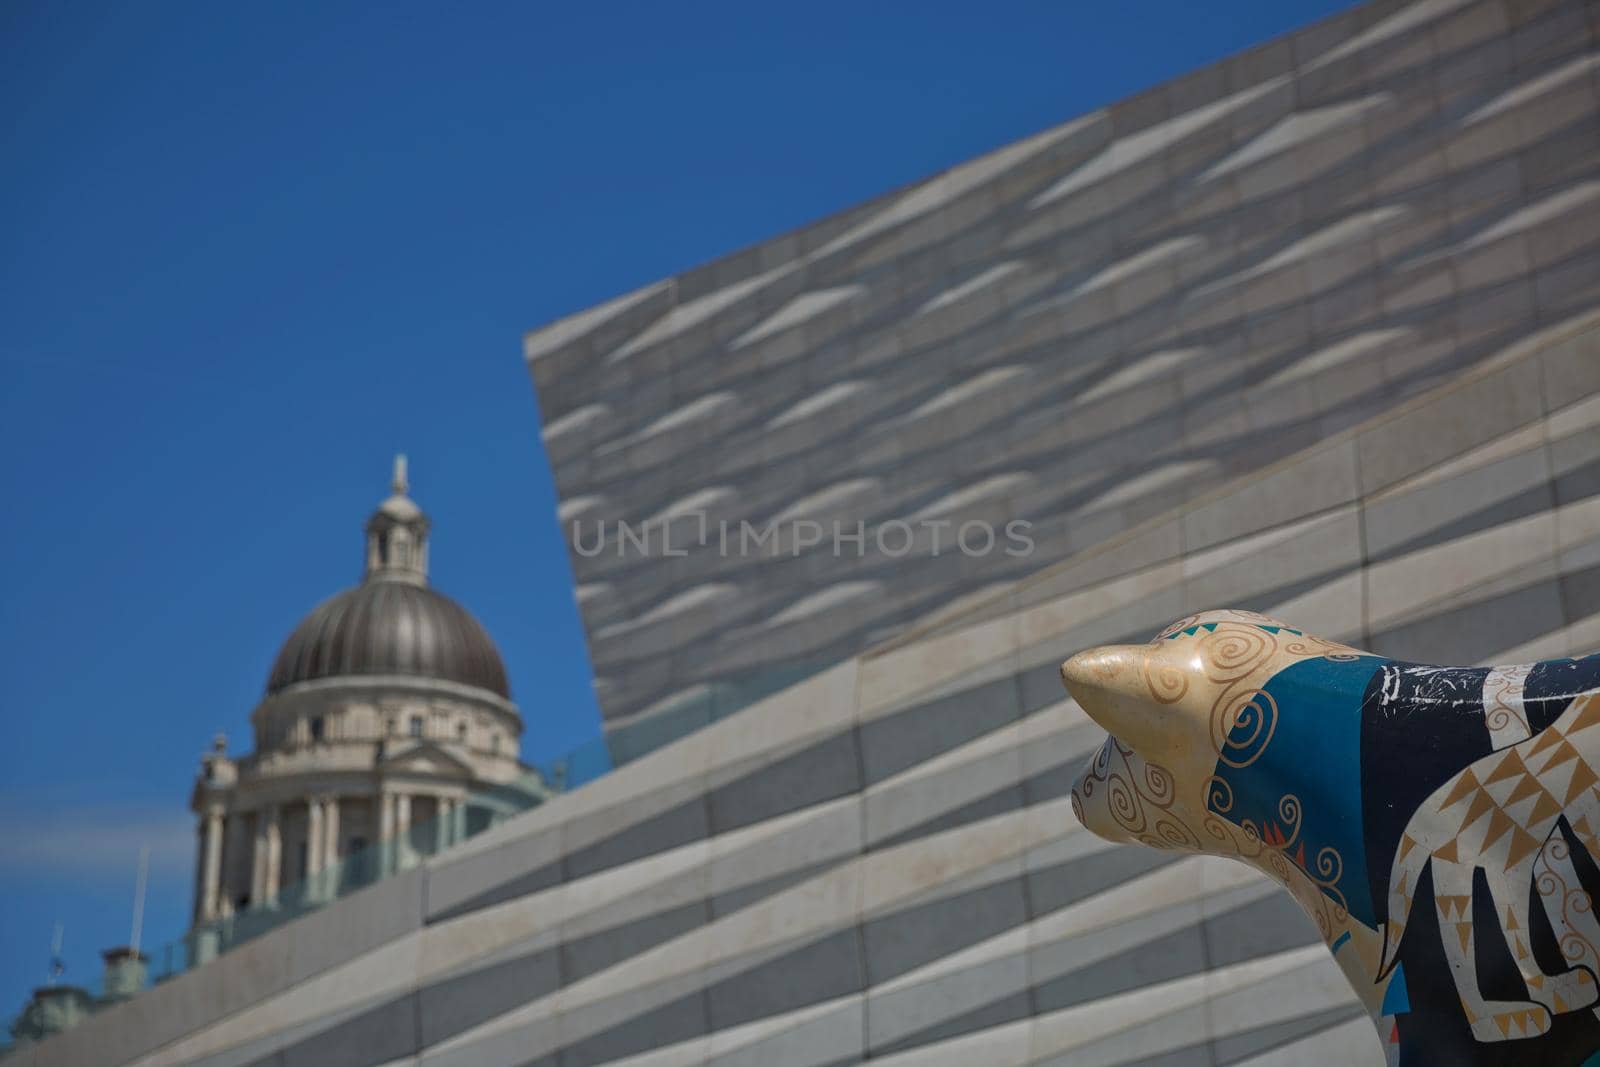 Port of Liverpool Building (or Dock Office) in Pier Head, along the Liverpool's waterfront, England, United Kingdom by wondry